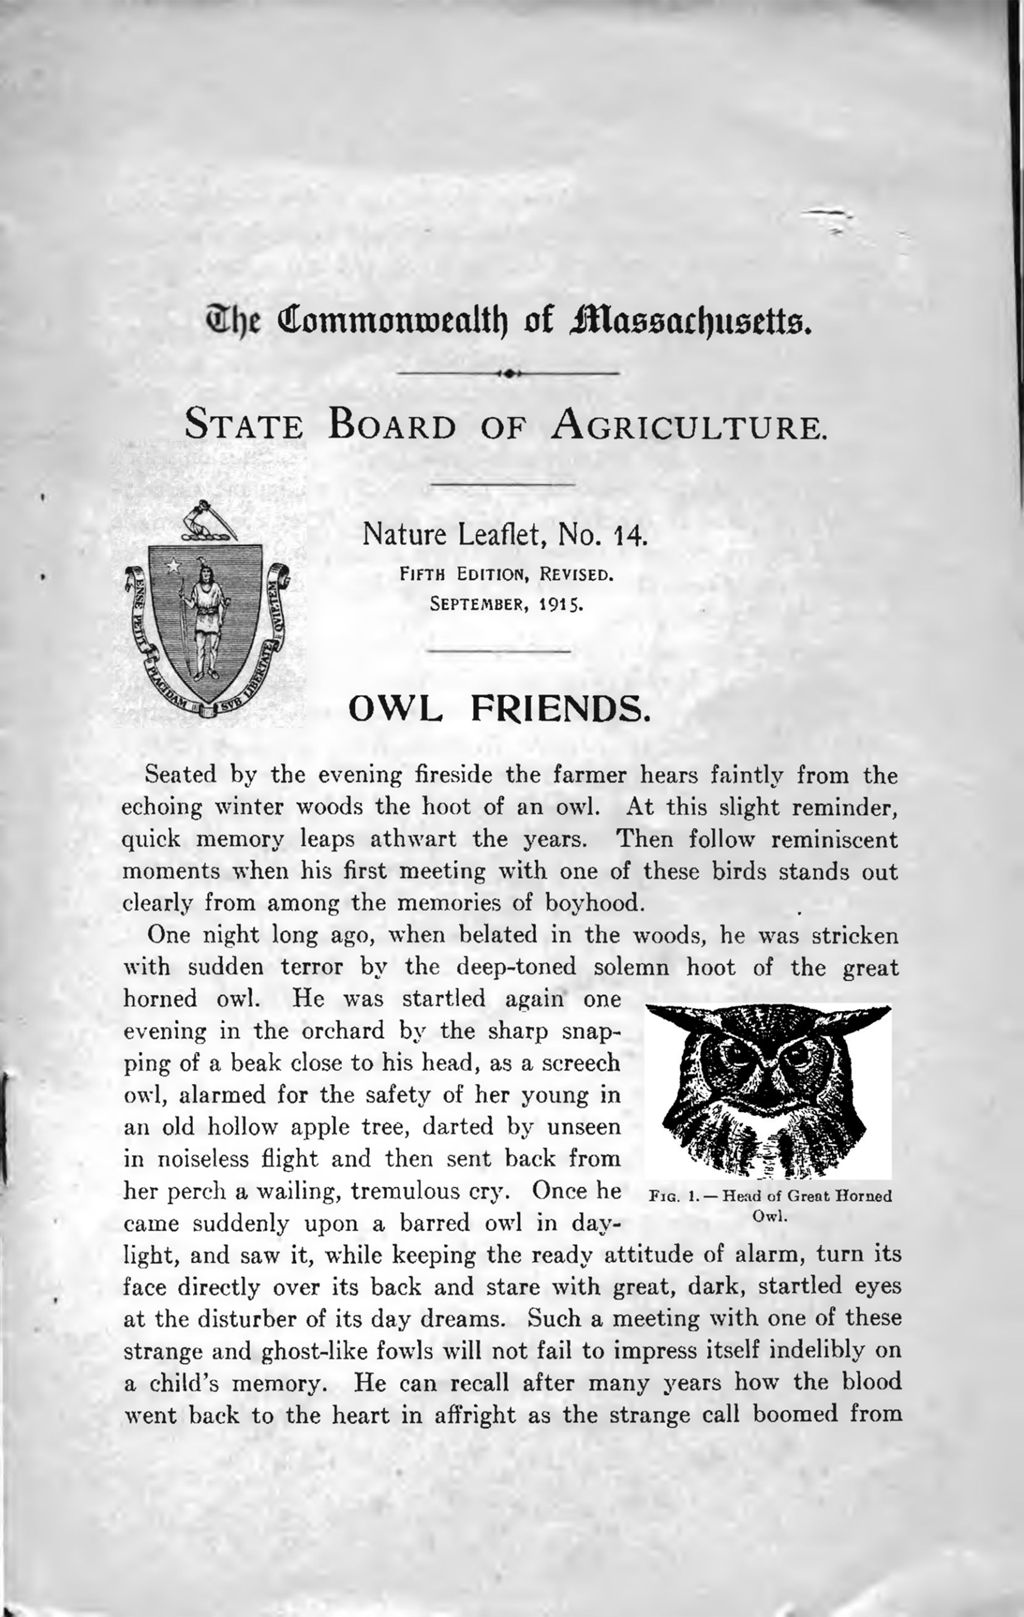 Miniature of Massachusetts State Board of Agriculture, Nature Leaflet, no. 14, Owl Friends, 1915